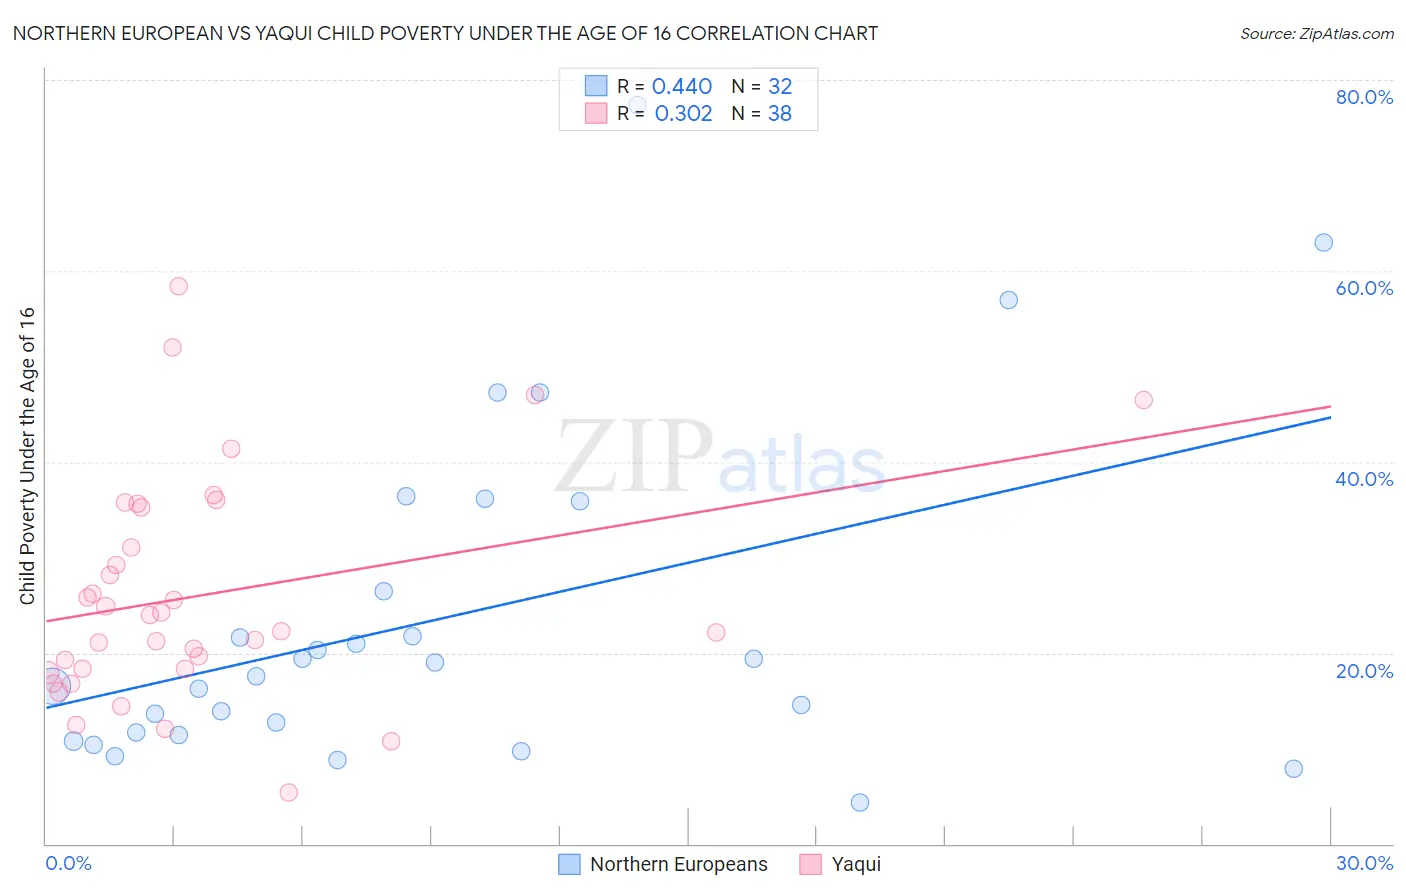 Northern European vs Yaqui Child Poverty Under the Age of 16